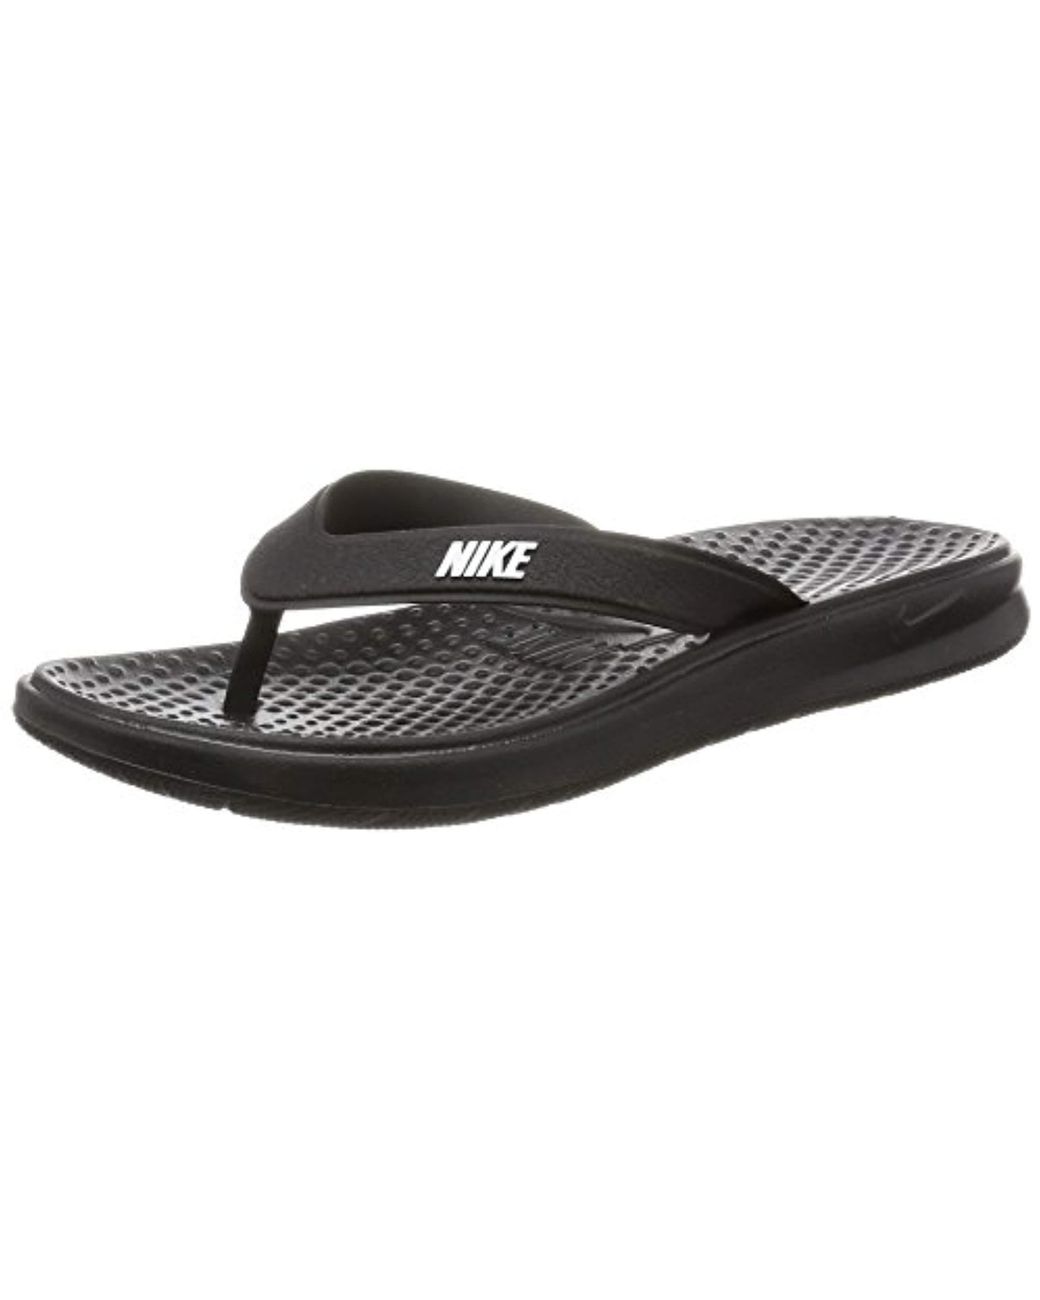 Nike Rubber Solay Thong Flip-flop in Black/White (Black) | Lyst